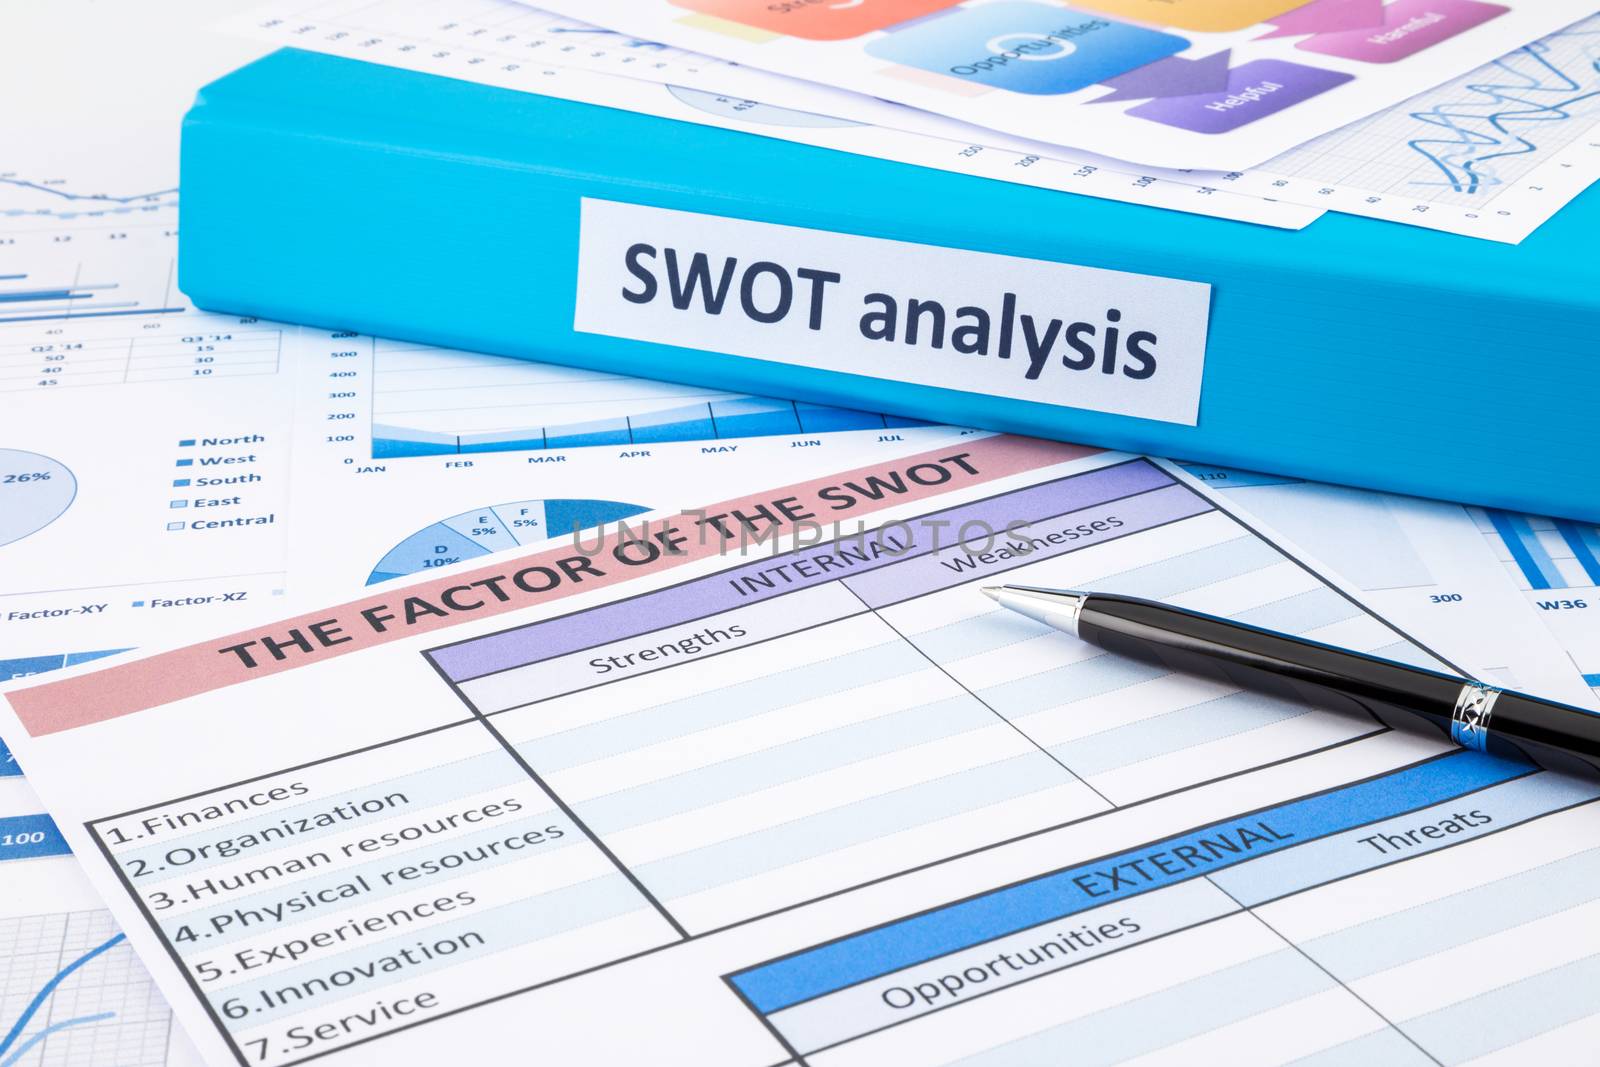 Document of SWOT analysis for business planning and evaluation by vinnstock